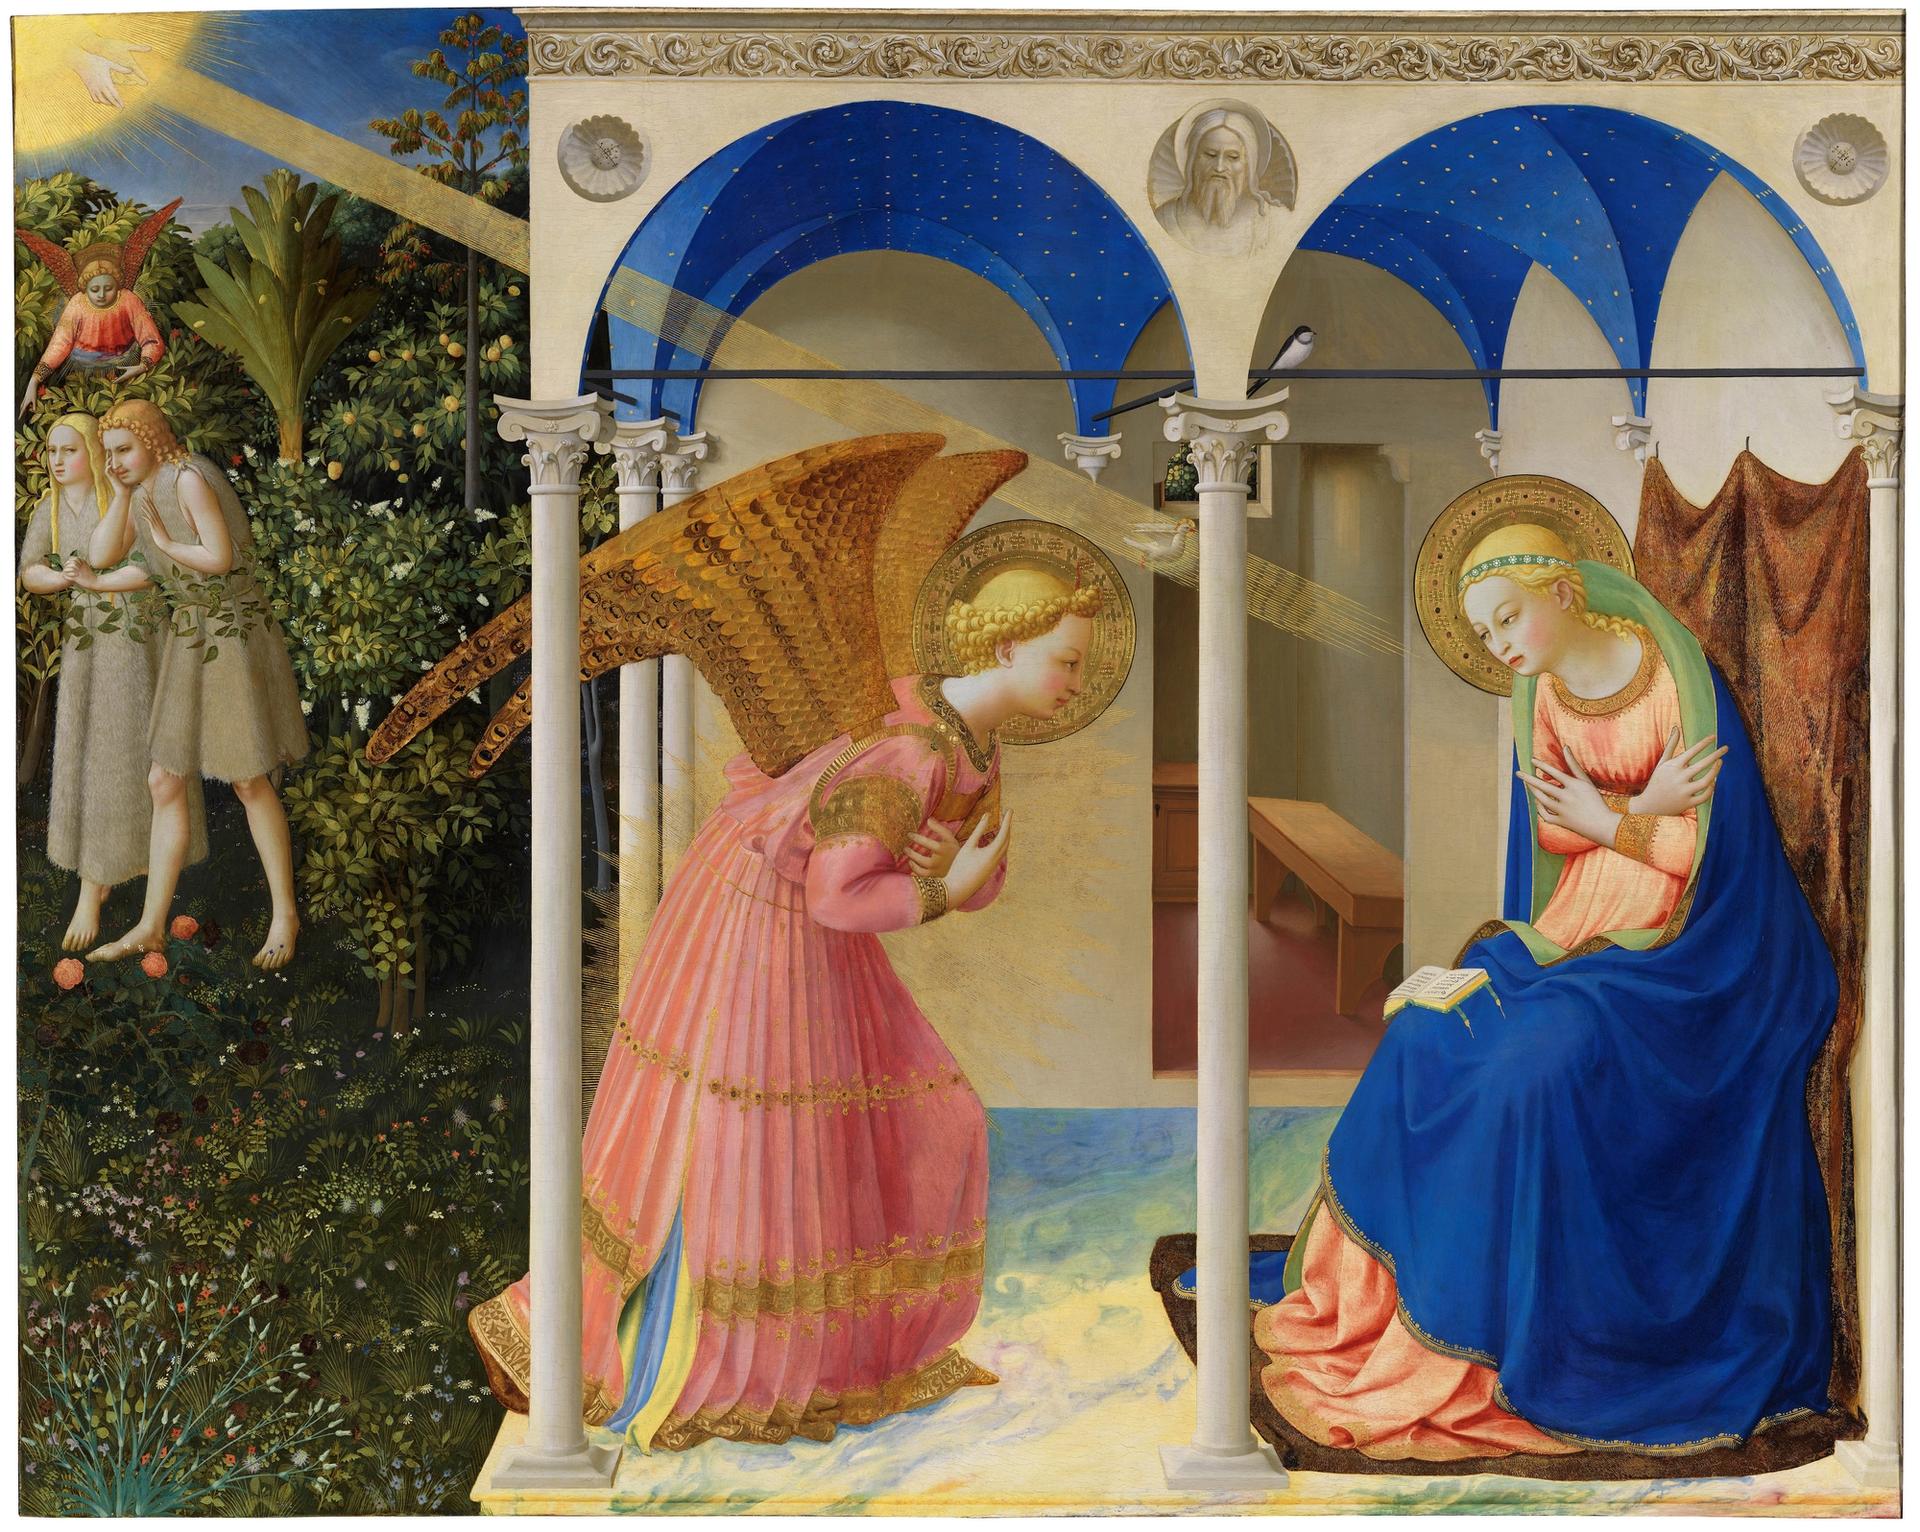 Fra Angelico, The Annunciation Courtesy of the Museo del Prado